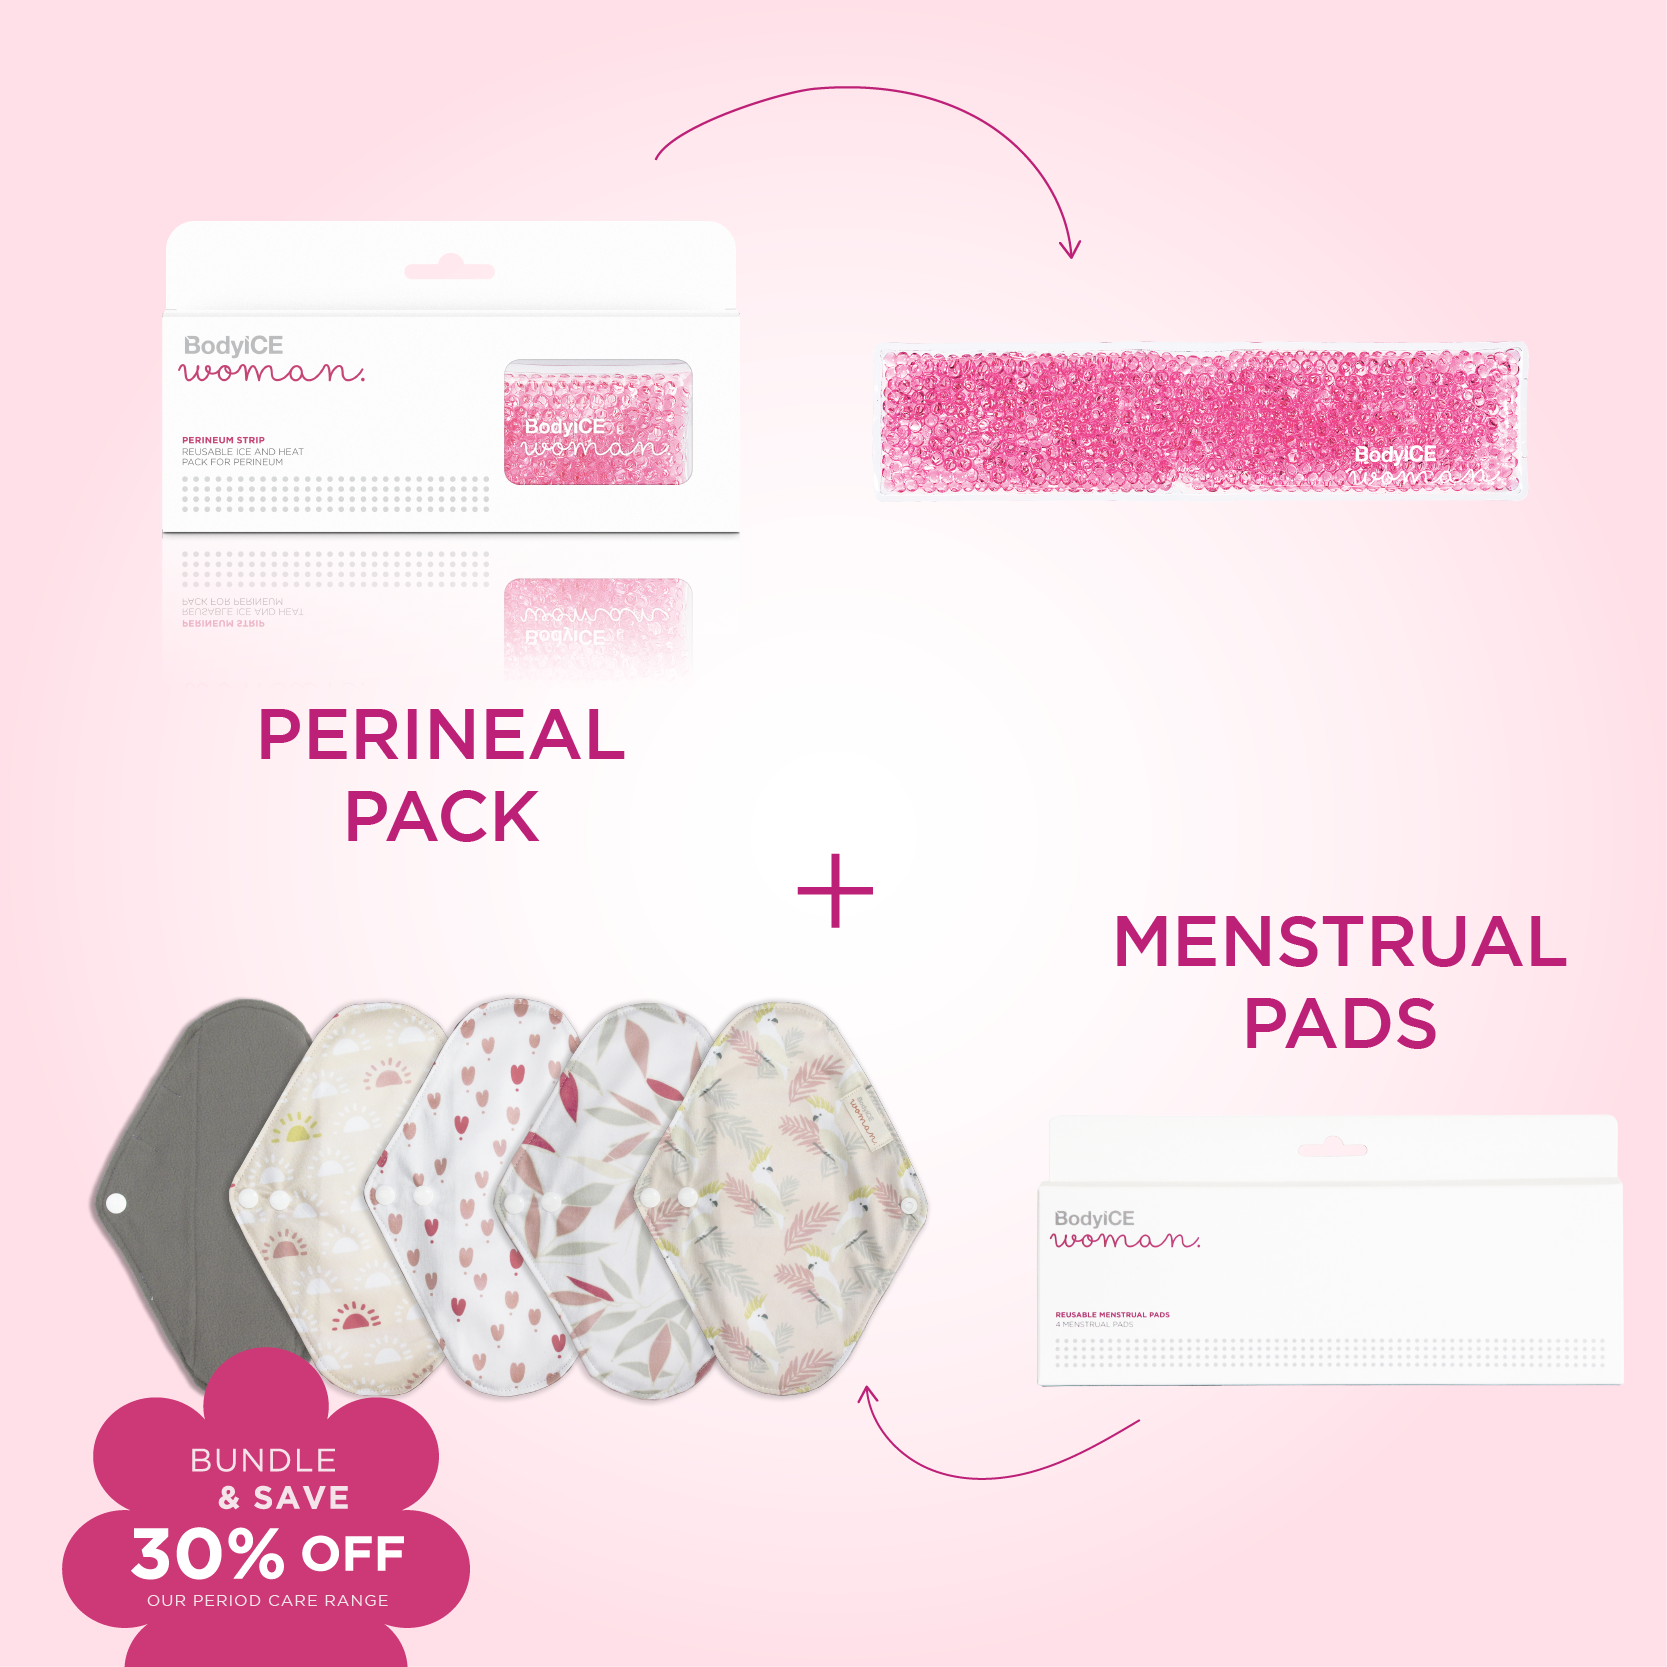 Ninja Mama Perineal Ice Packs • Bubsessed : Postpartum and Baby Products,  Gifts & Hampers in Australia : Products for Mums-to-Be